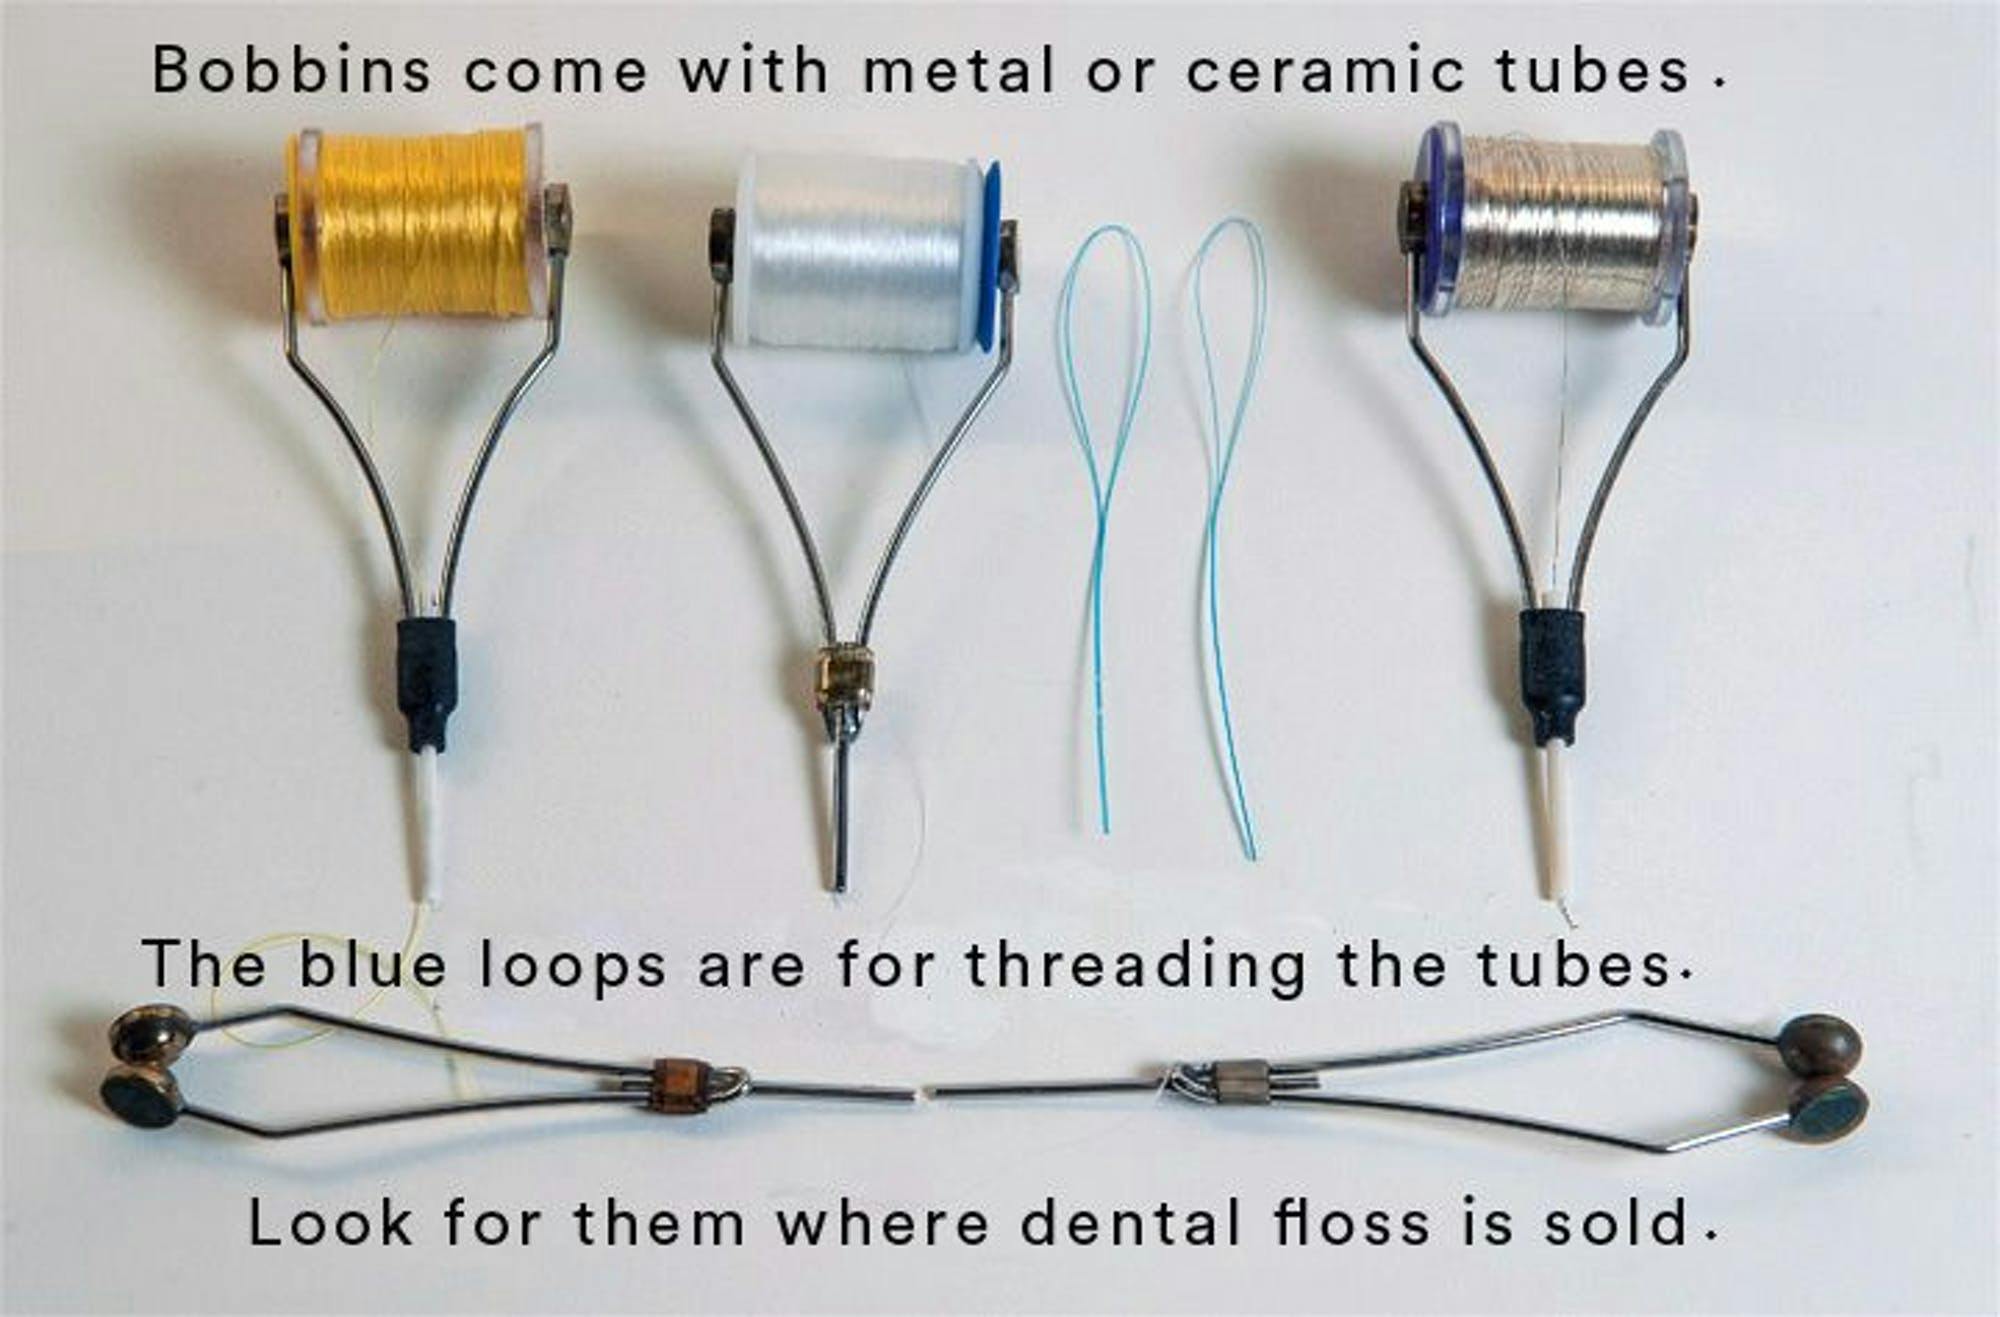 An image of five bobbins and two dental floss threaders on a white background. The text reads "Bobbins come with metal or ceramic tubes. The blue loops are for threading the tubes. Look for them where dental floss is sold."